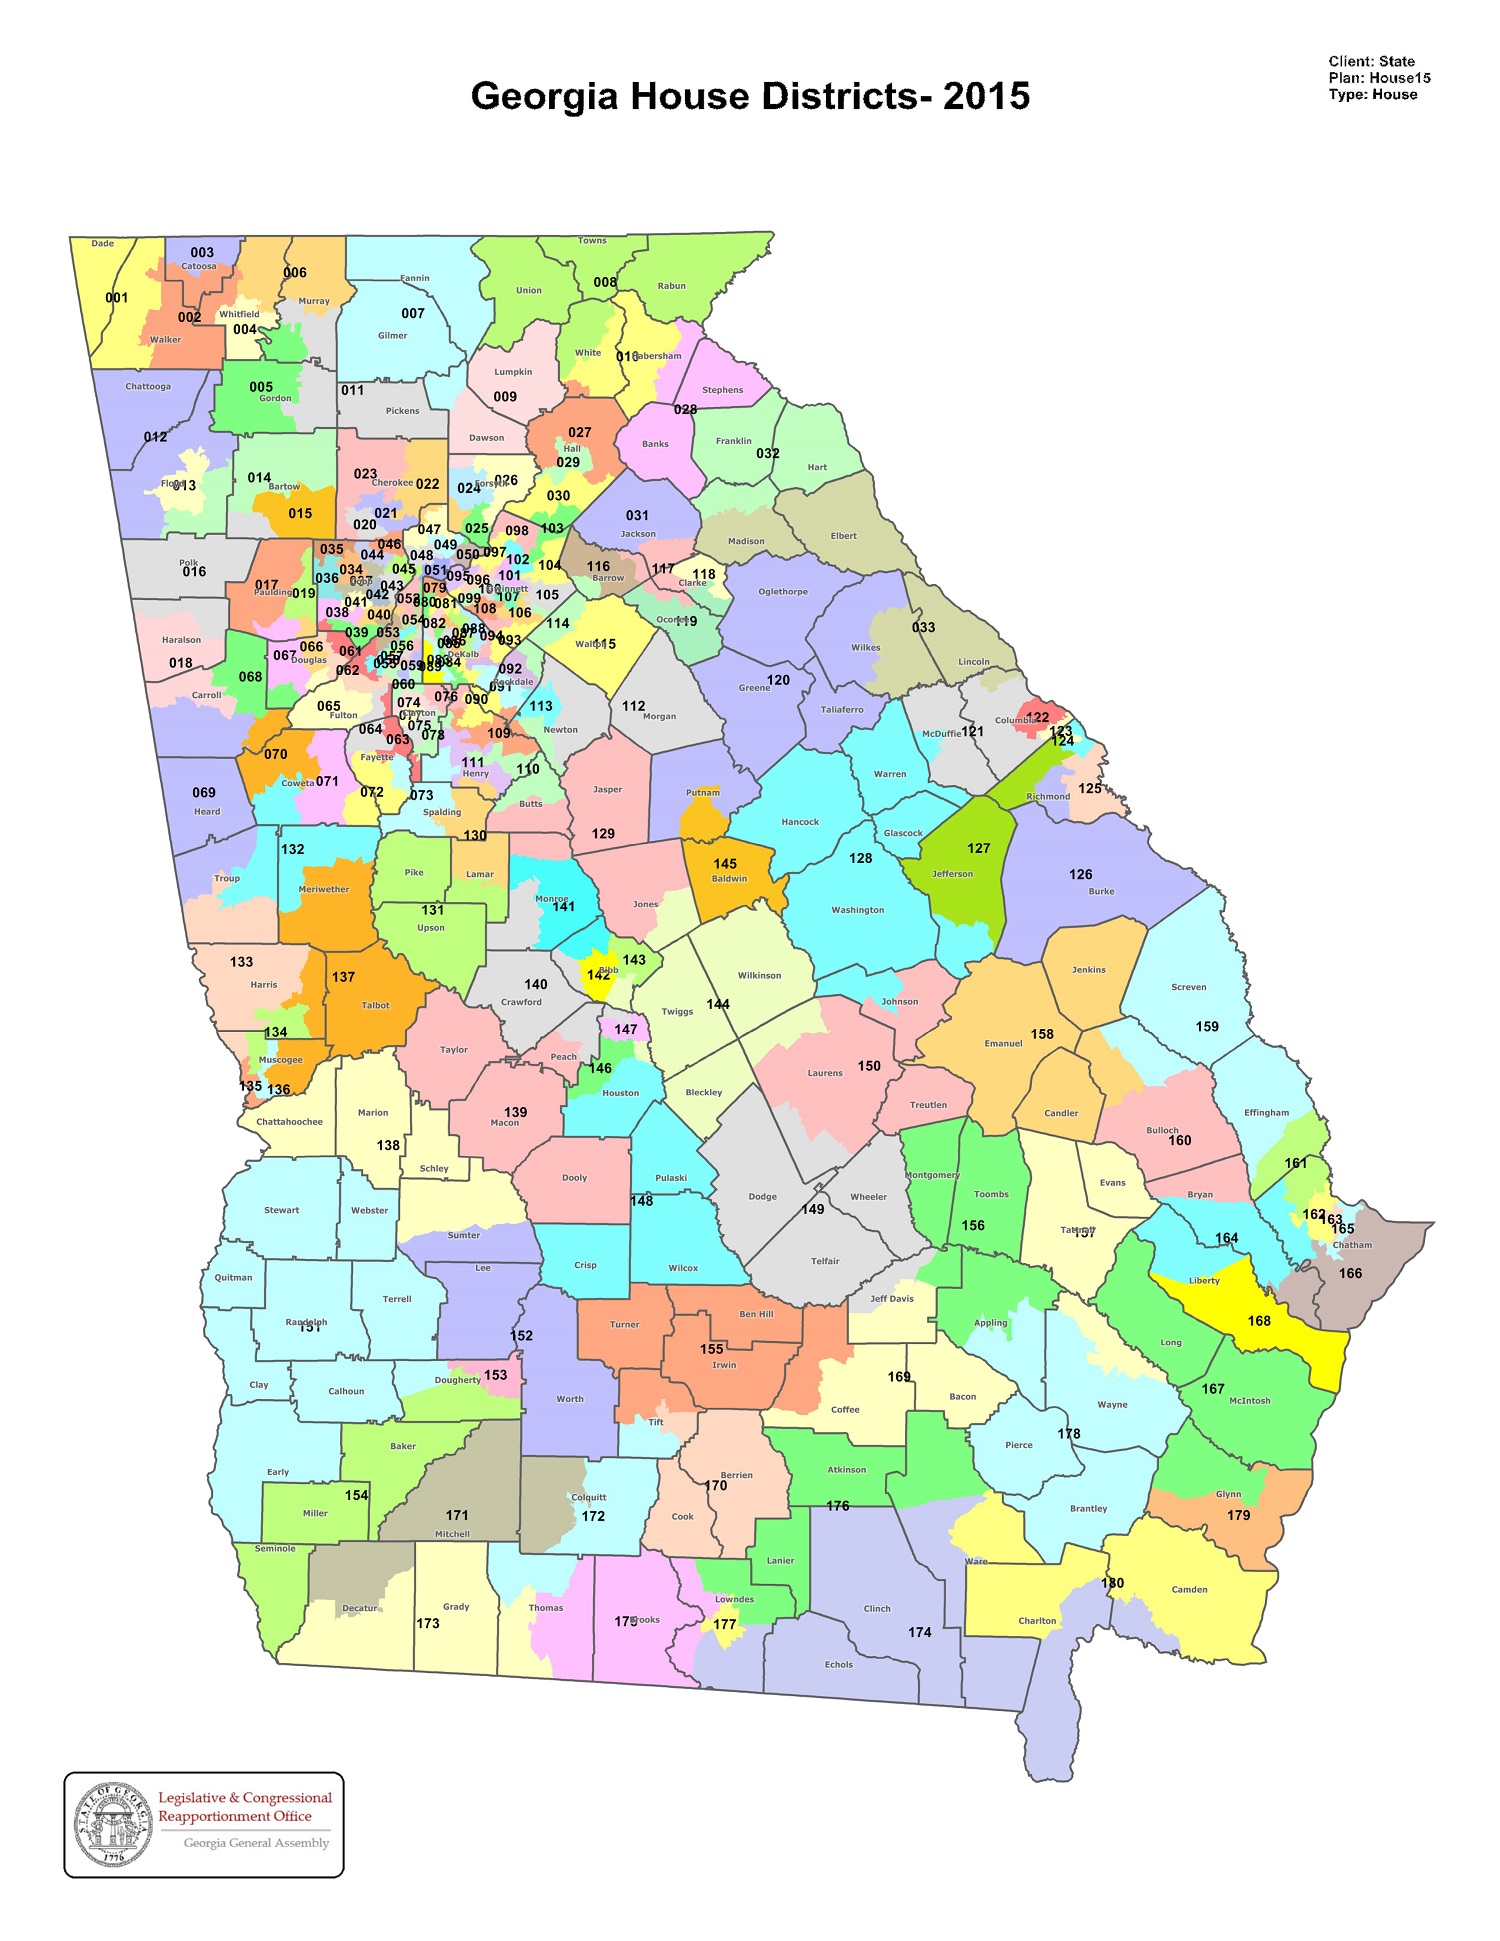 State redistricting information for